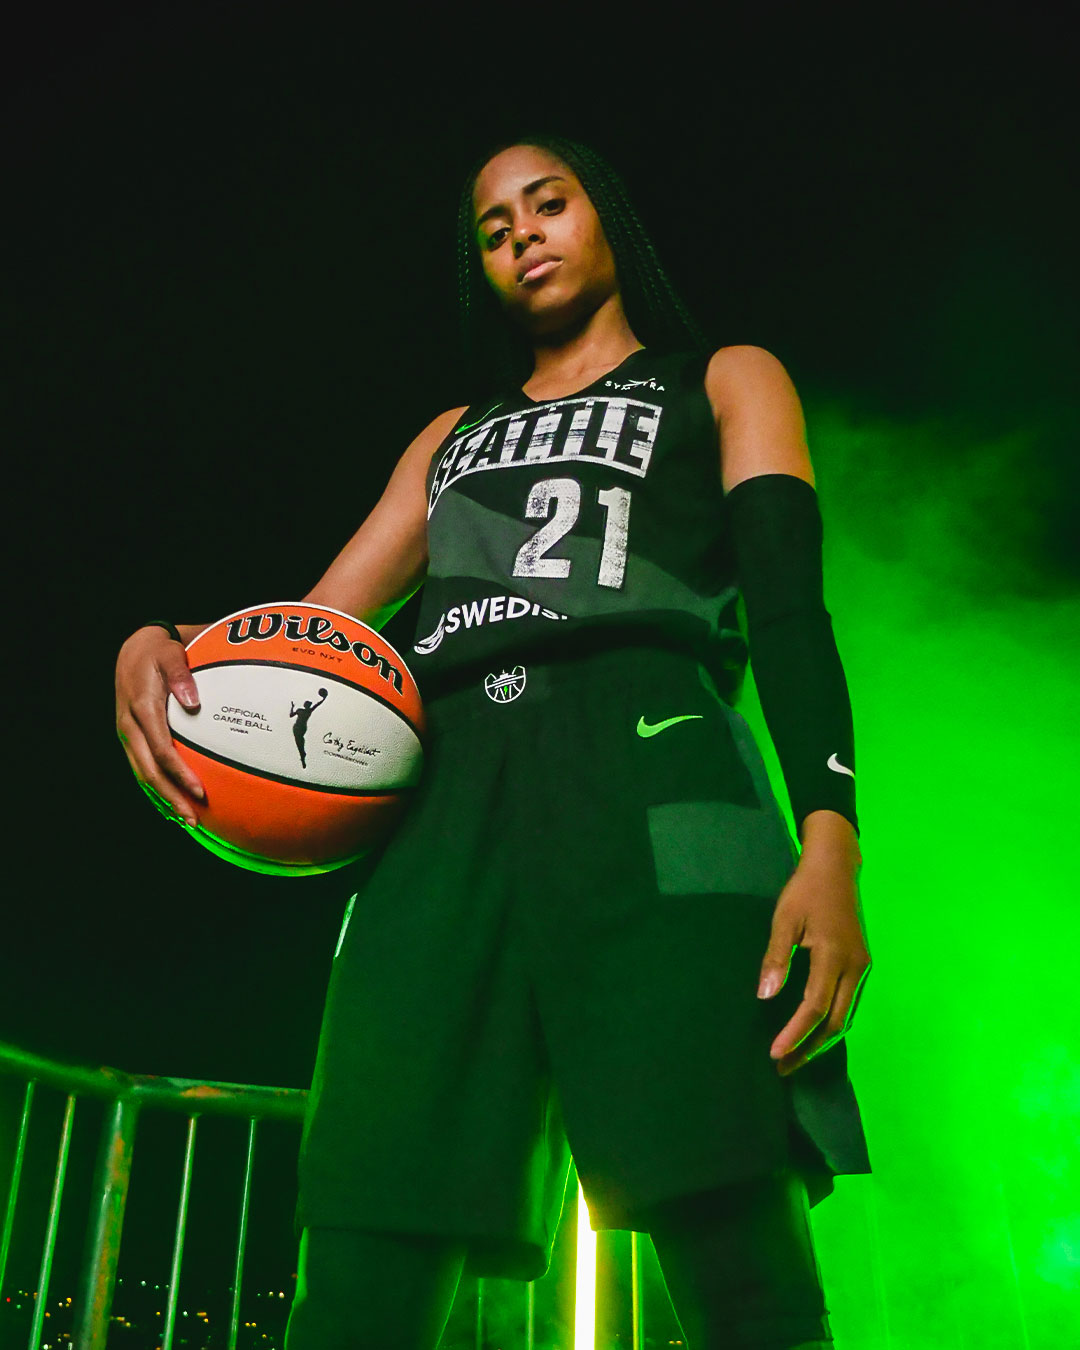 New Nike WNBA Jerseys Are About To Change The Game Like The Players Wearing  Them - BasketballBuzz